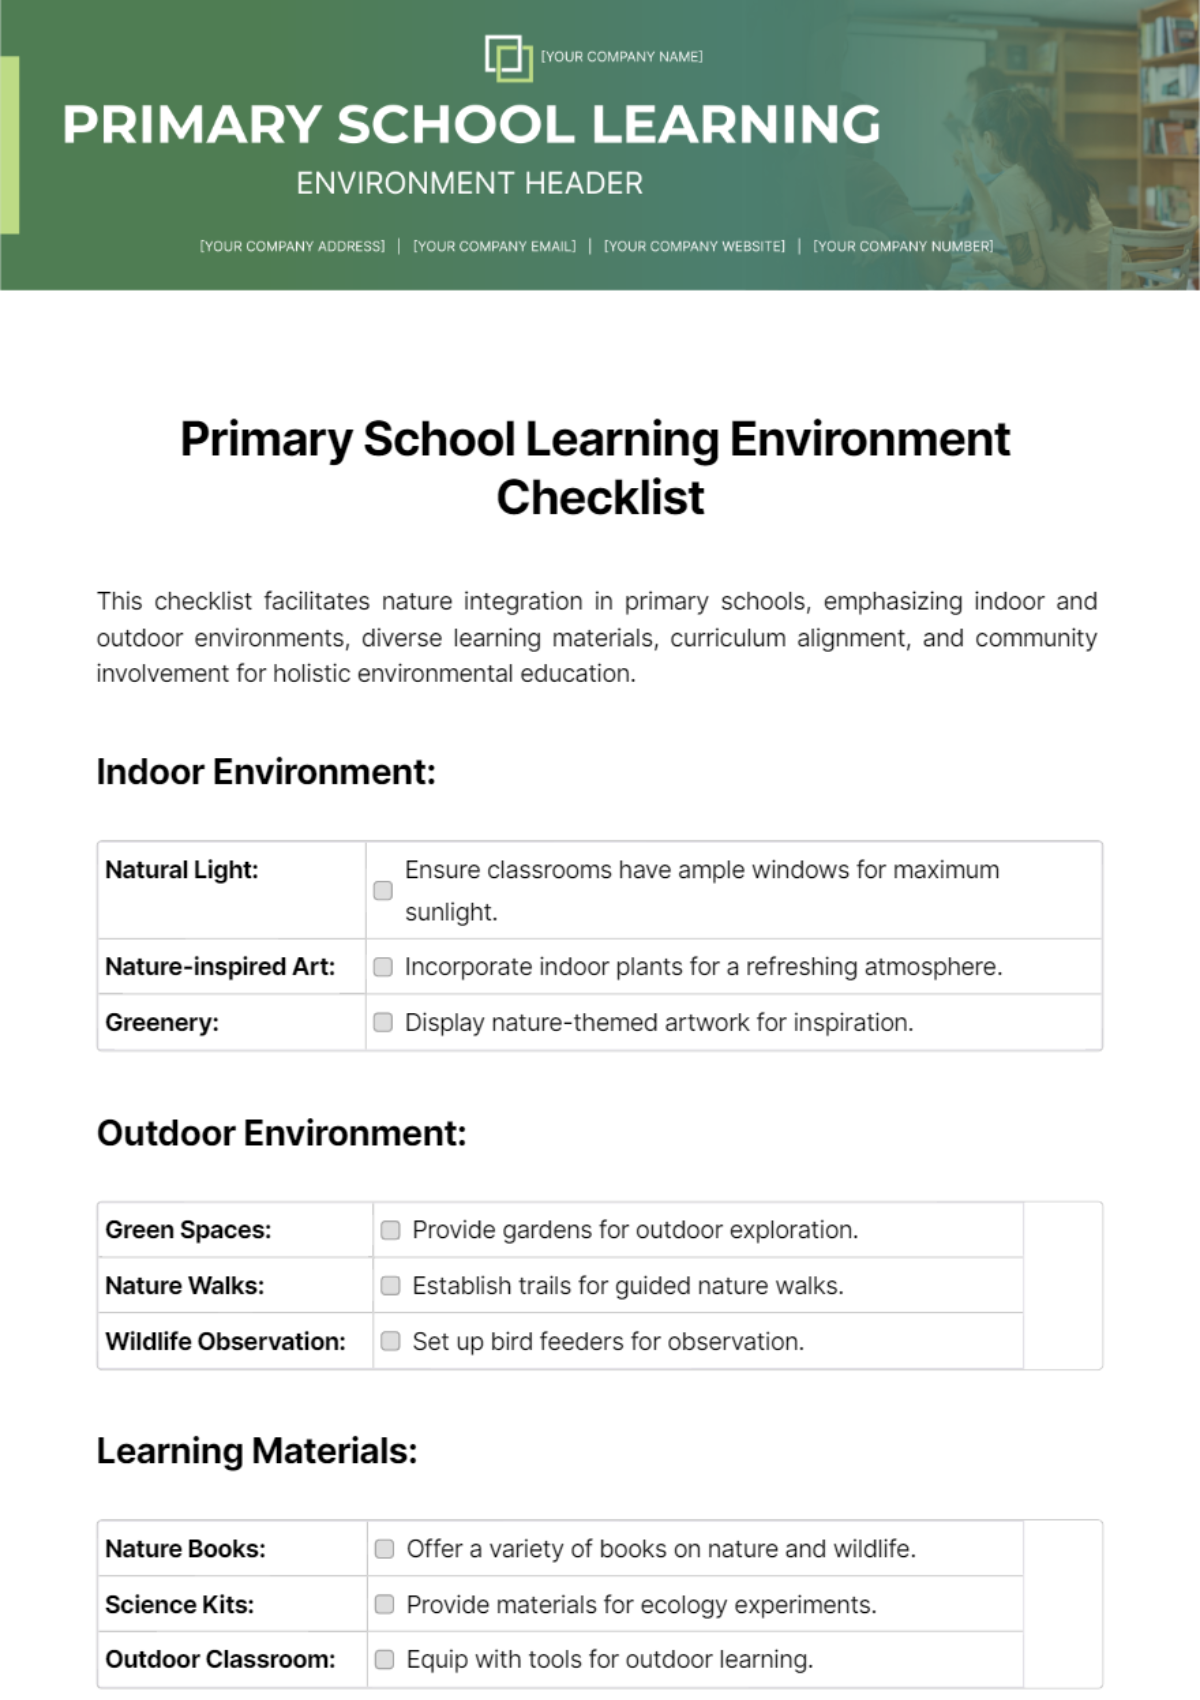 Free Primary School Learning Environment Checklist Template